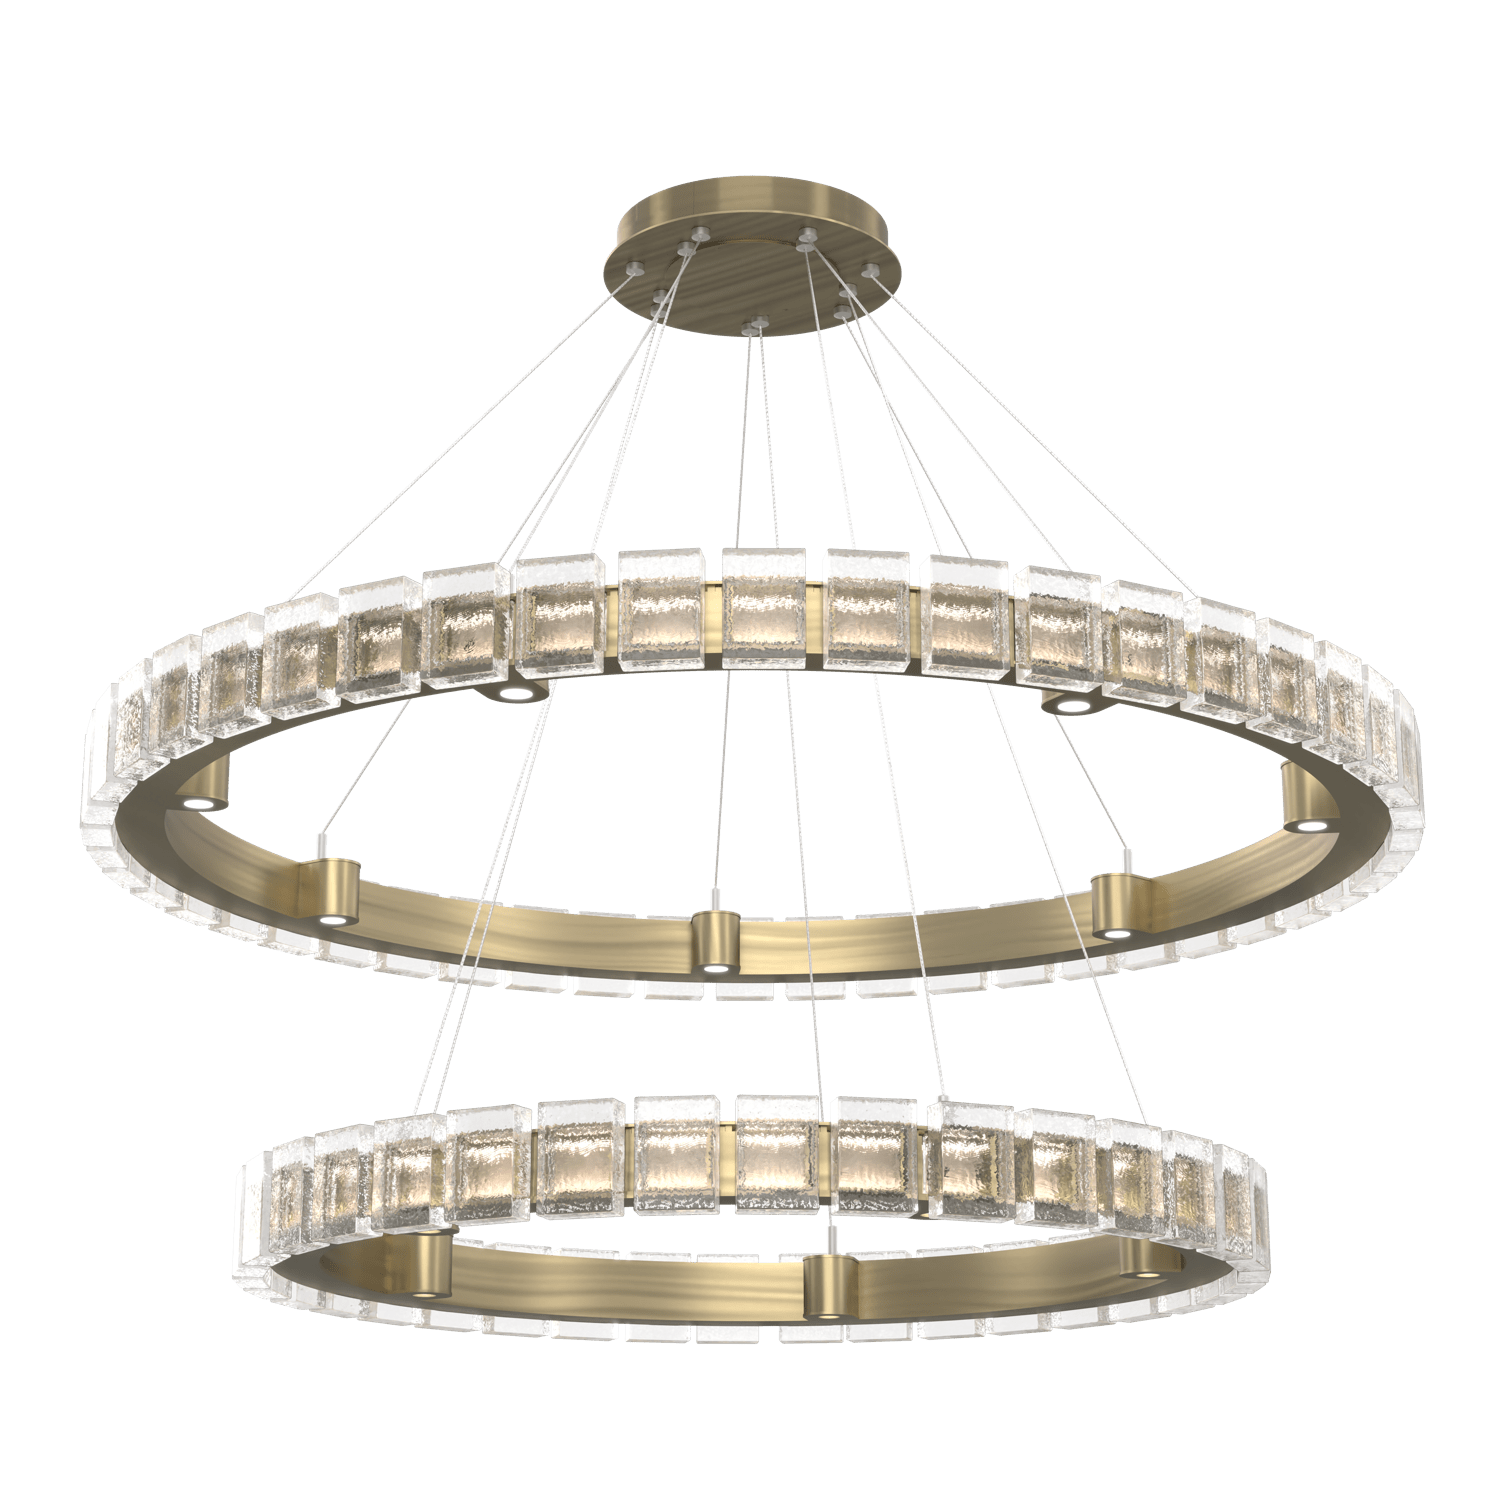 CHB0087-2T-HB-TP-Hammerton-Studio-Tessera-50-inch-two-tier-ring-chandelier-with-heritage-brass-finish-and-clear-pave-cast-glass-shade-and-LED-lamping